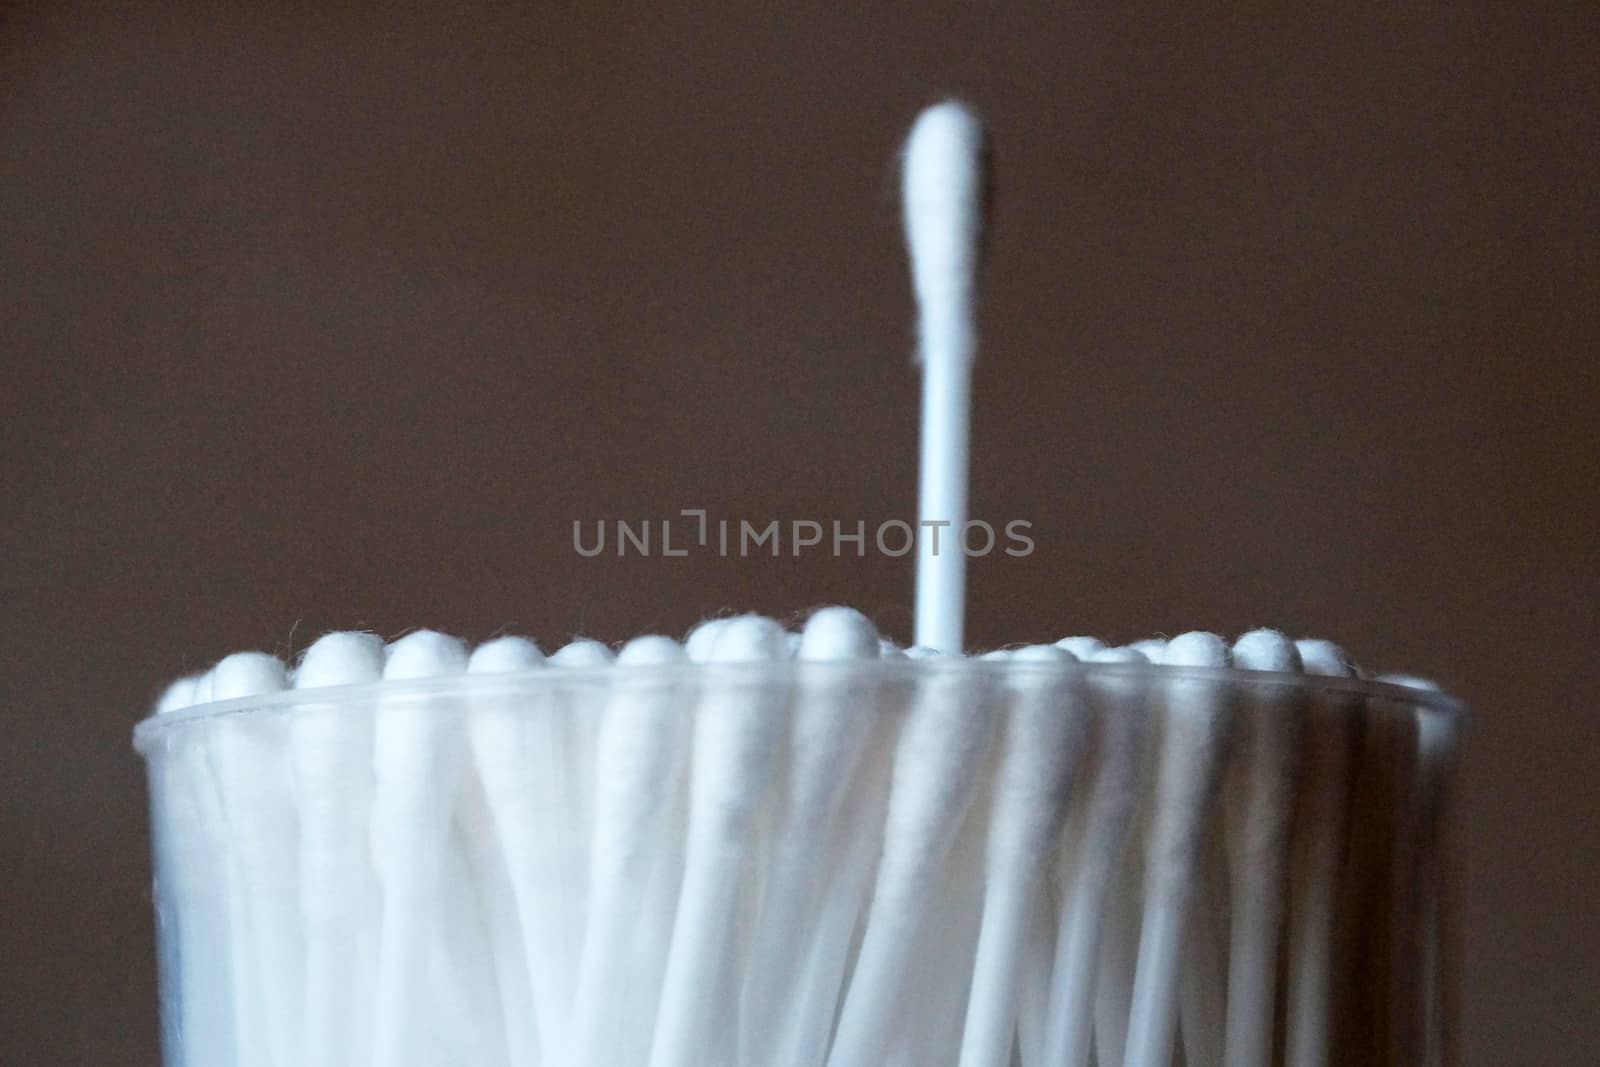 even packing of cotton swabs with one extended stick by Annado